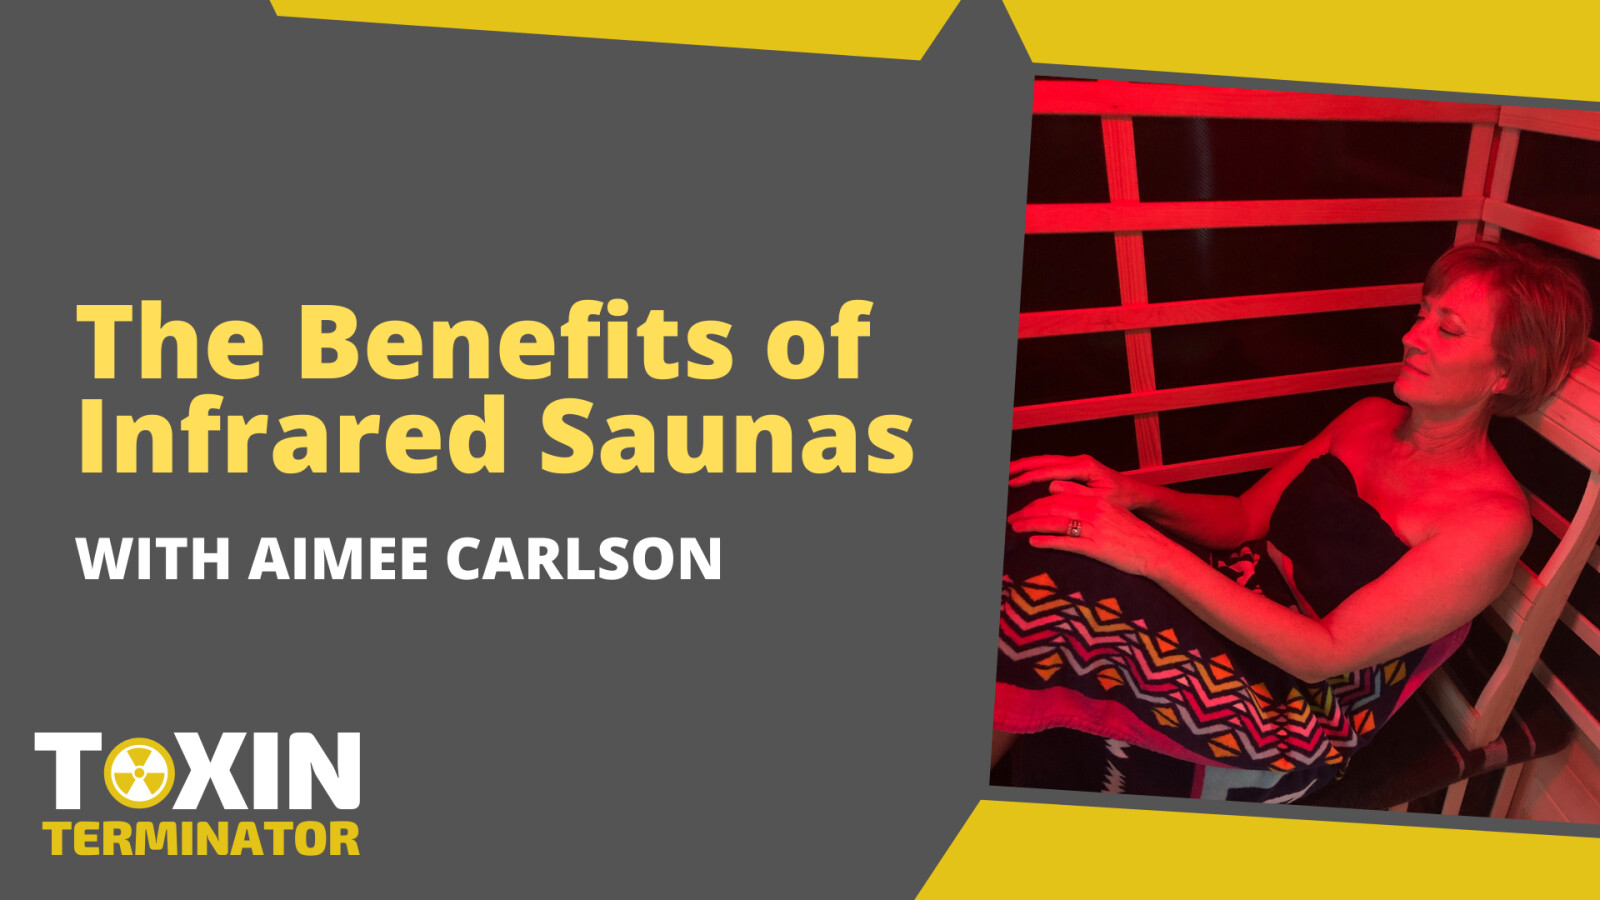 The Benefits of Infrared Saunas